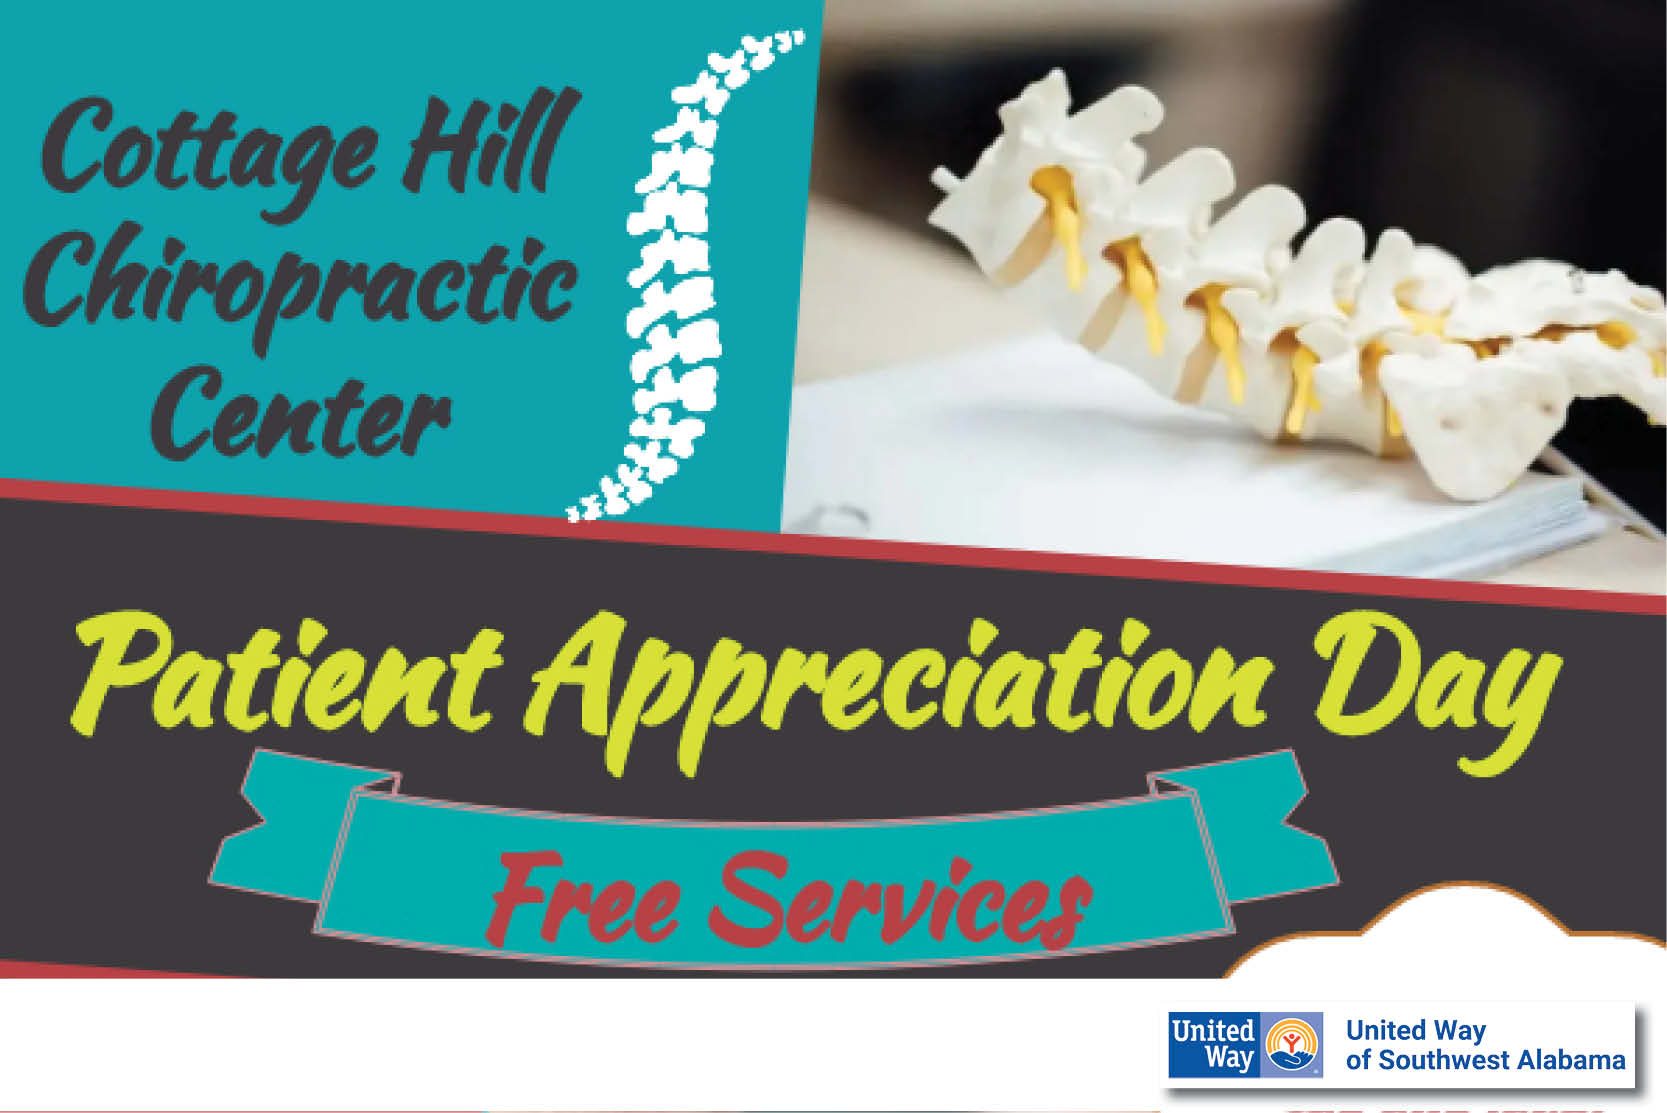 Cottage Hill Chiropractic Patient Appreciation Days. Free Services and a benefit for the United Way of Southwest Alabama.